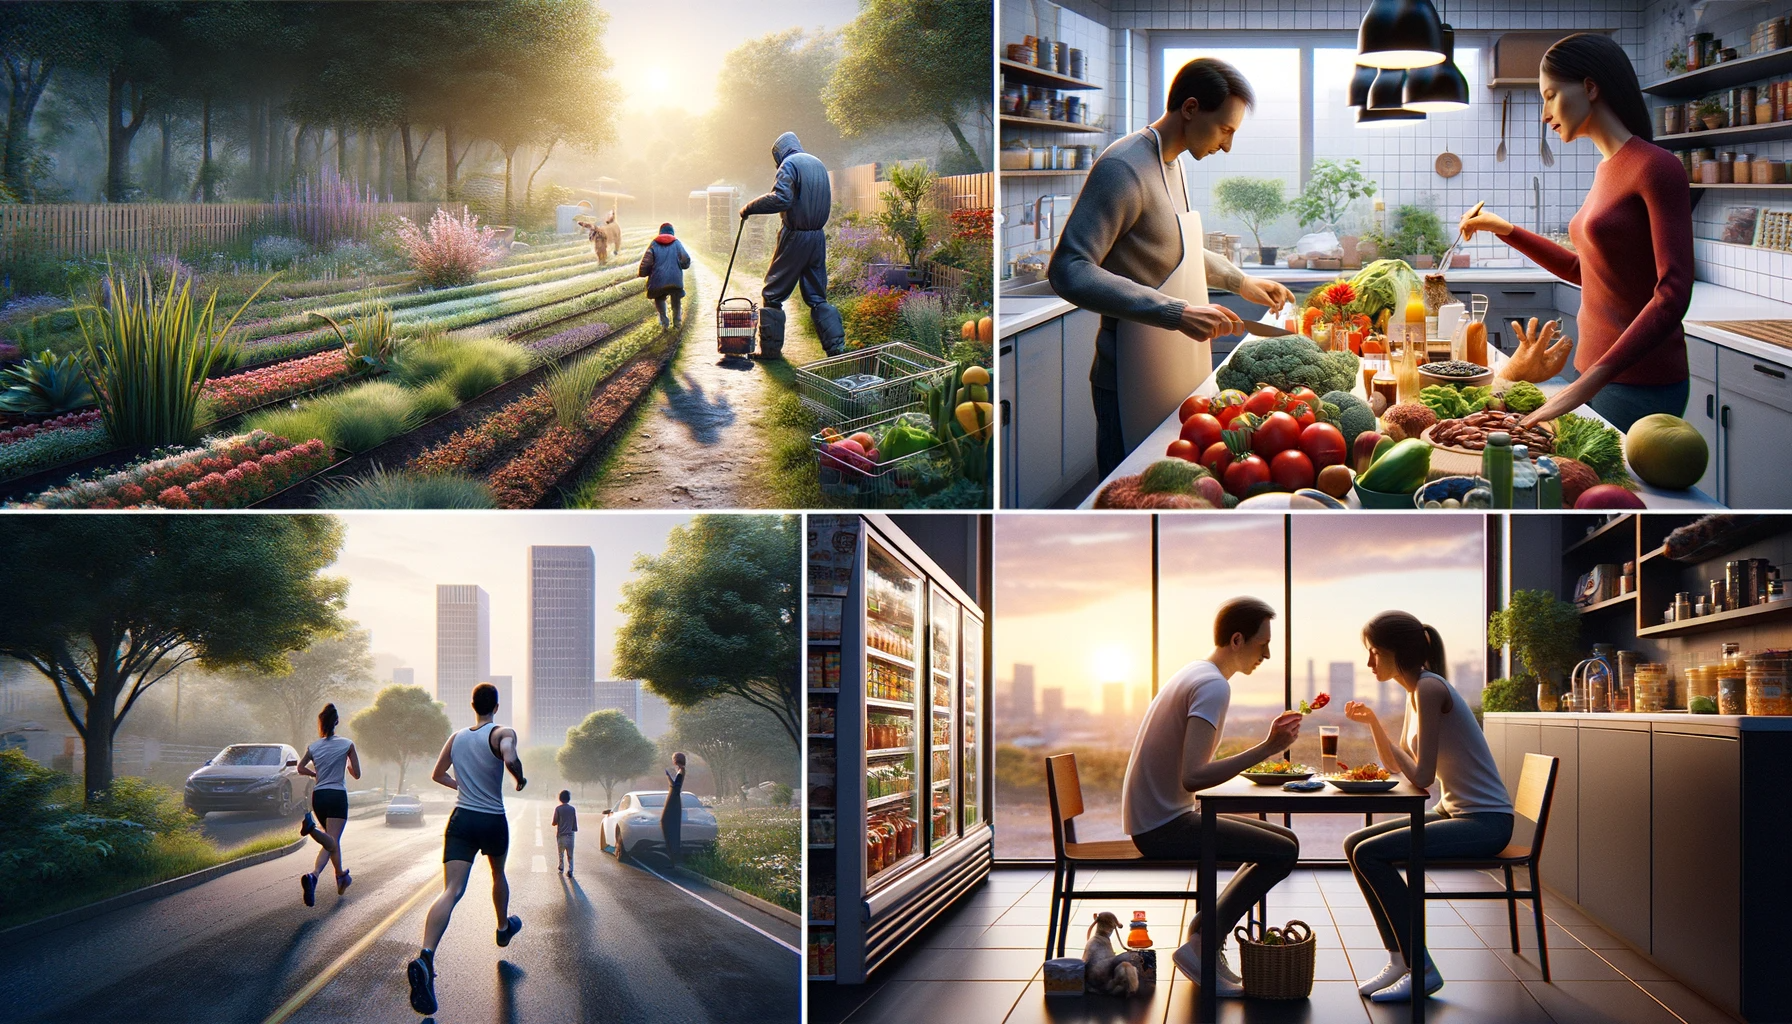 Photorealistic collage, showing different scenes from daily life, each capturing a unique aspect of everyday activities